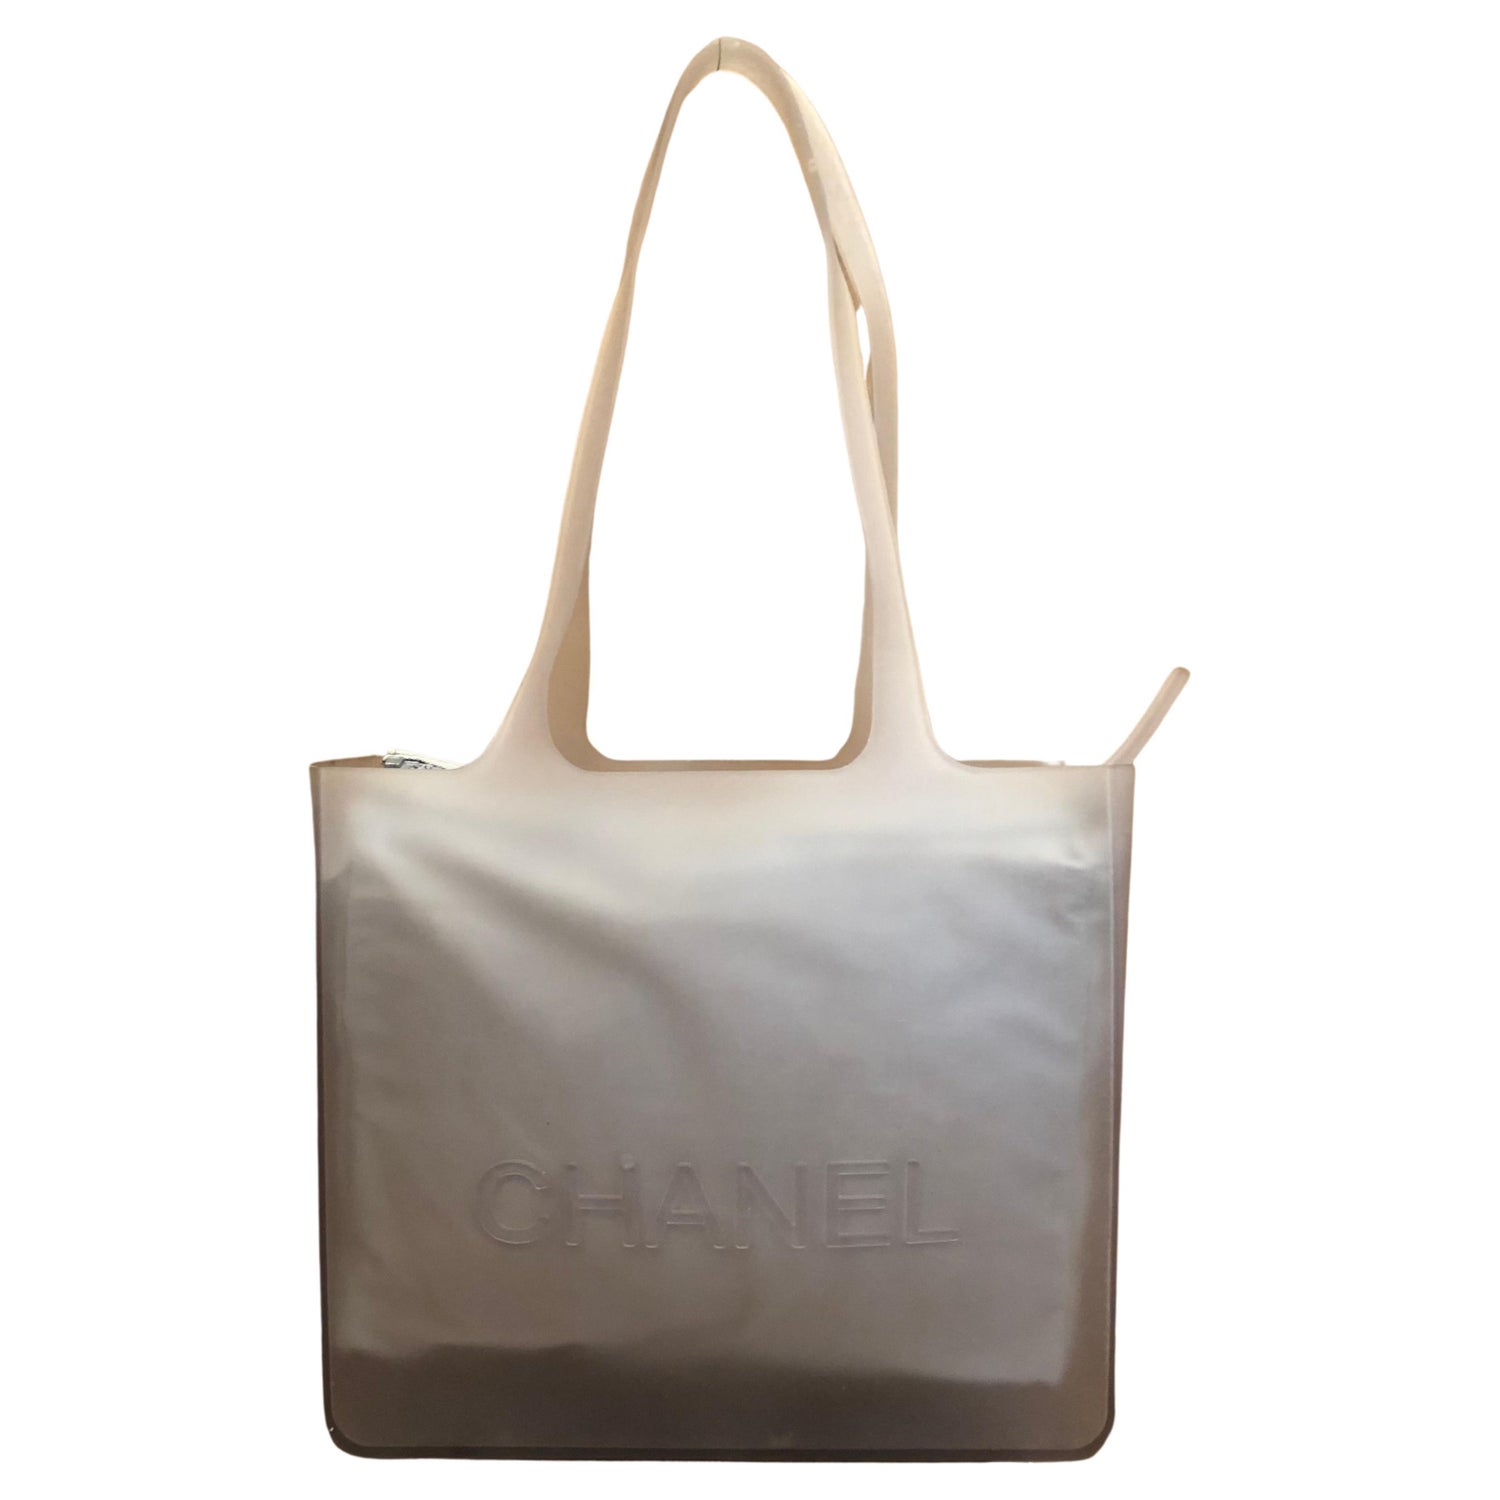 Chanel Grey Translucent Rubber Logo Jelly Tote Bag 927ca44